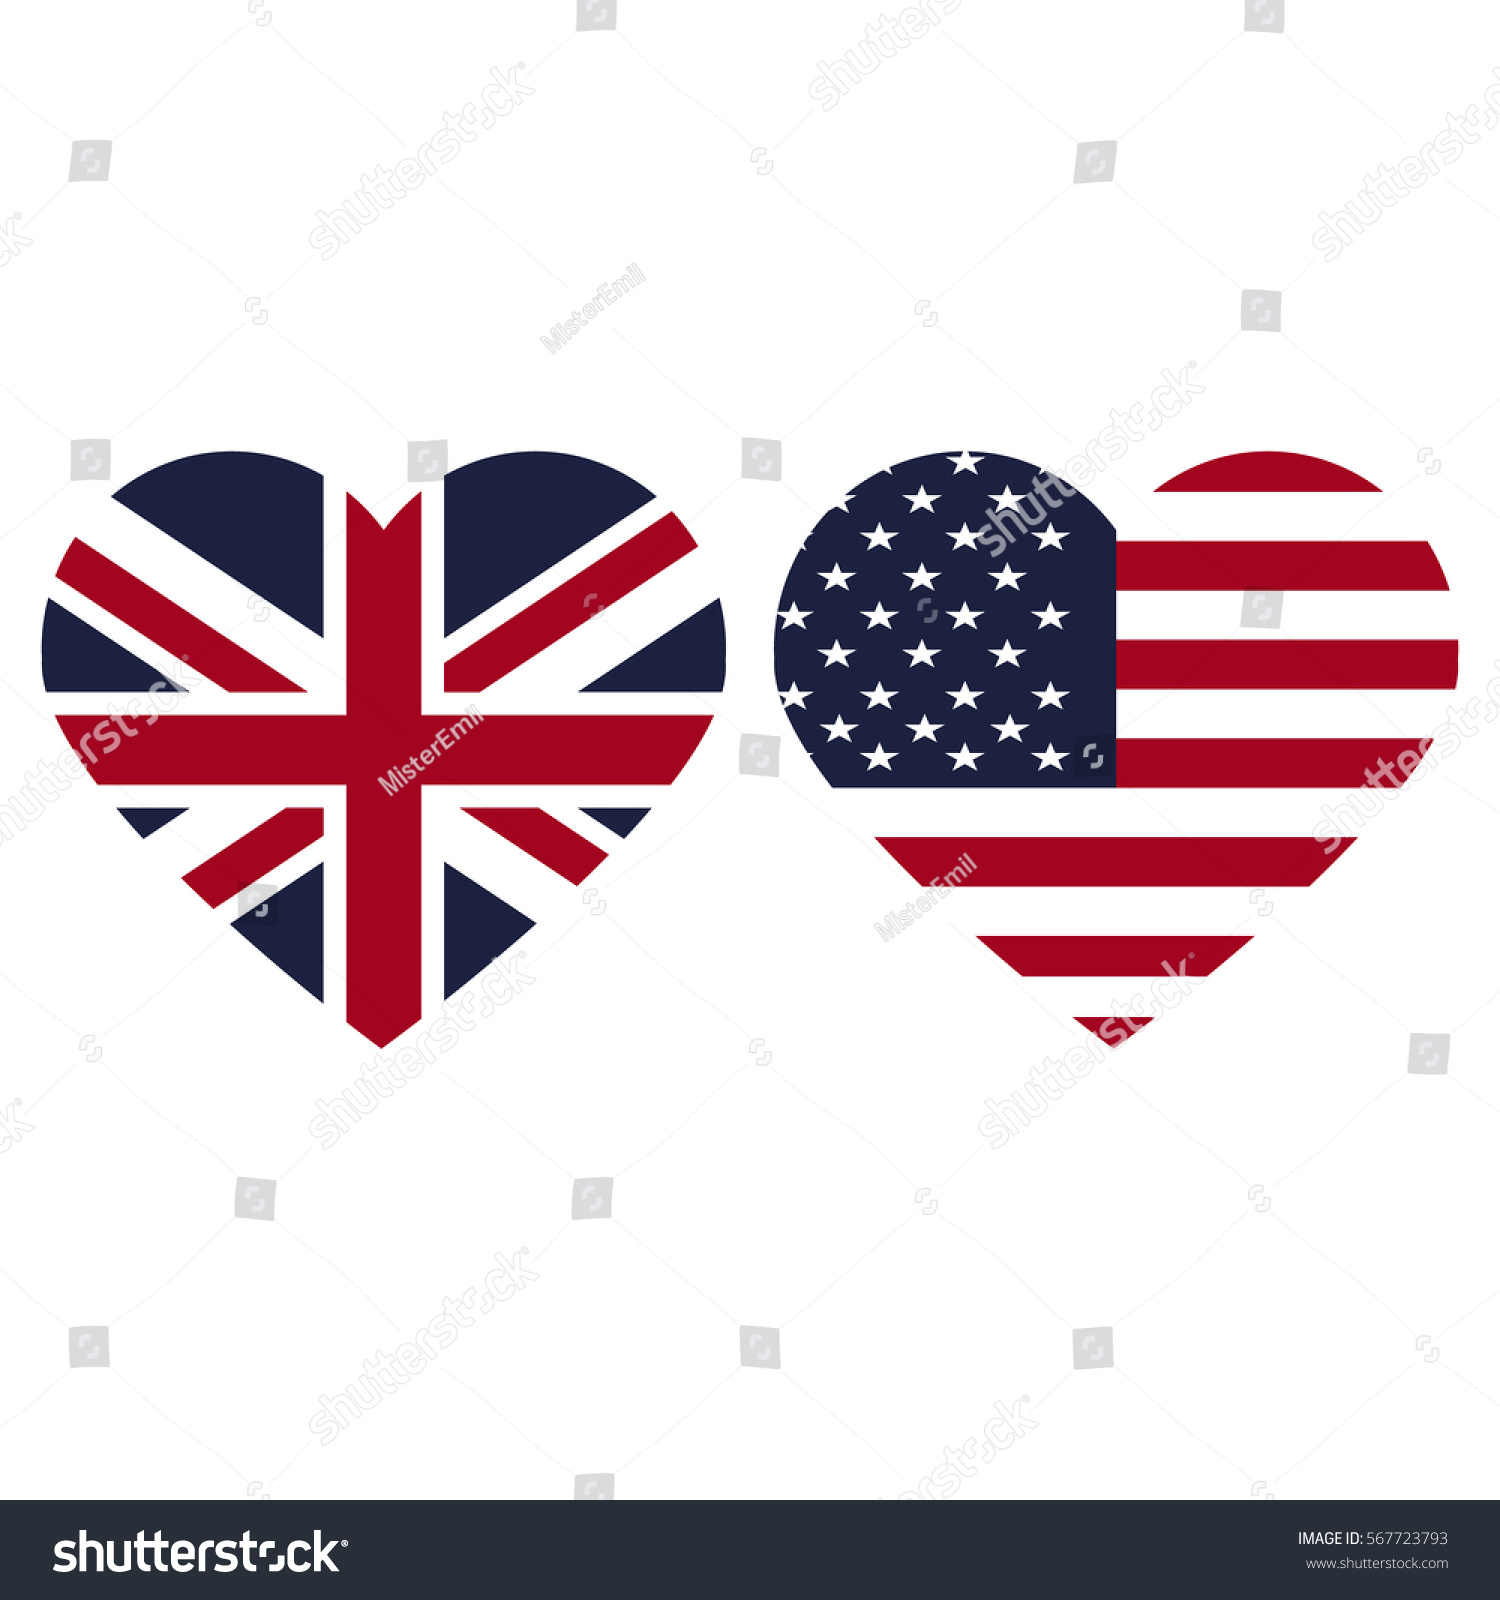 SVG of united states and united kingdom fkag hearts svg